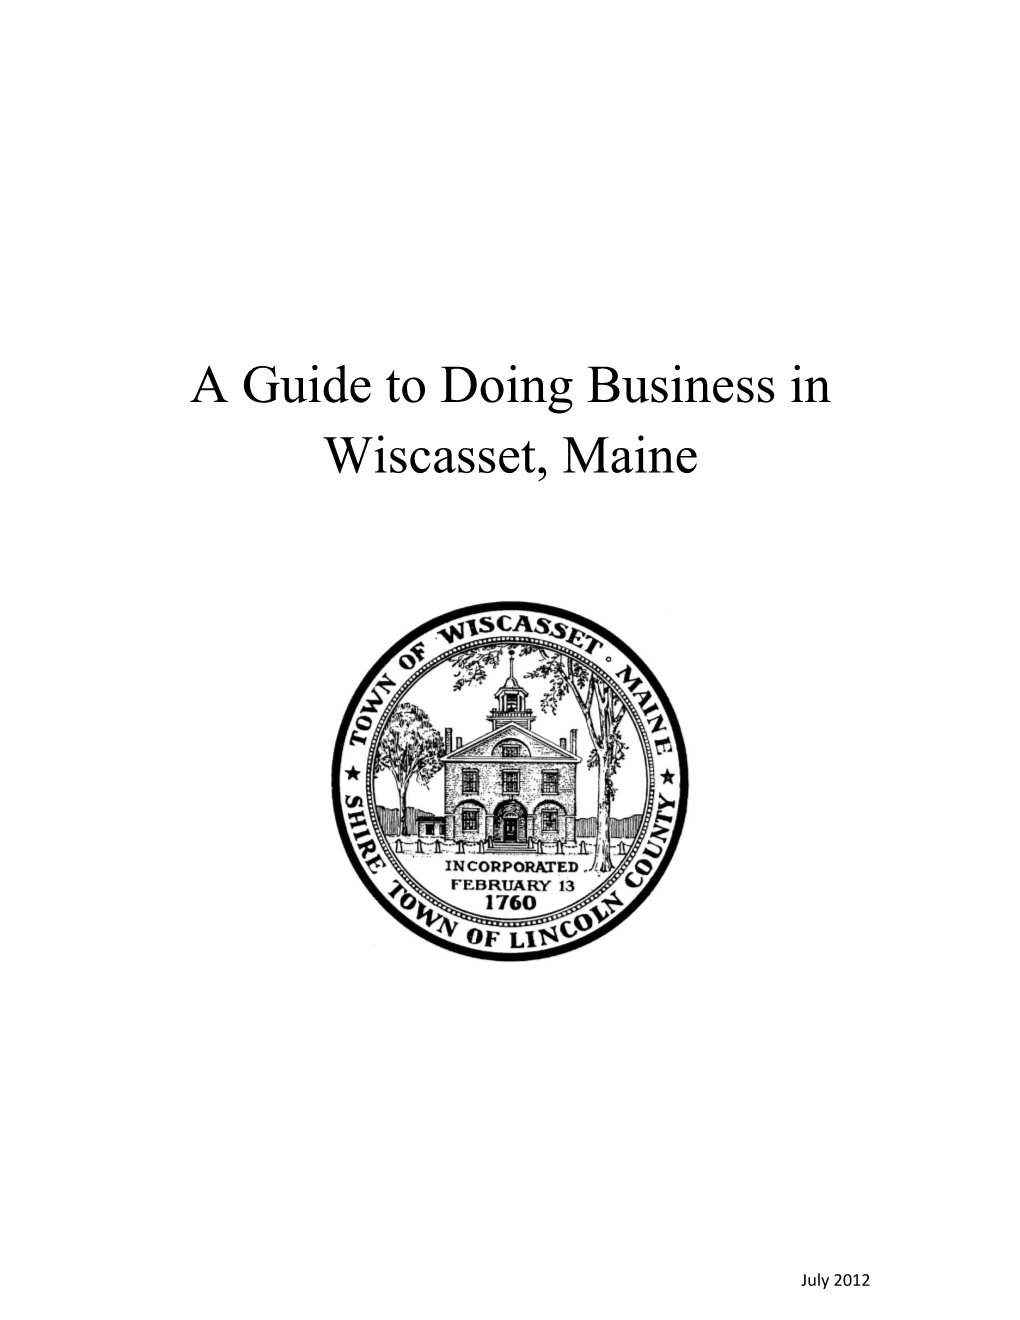 A Guide to Doing Business in Wiscasset, Maine